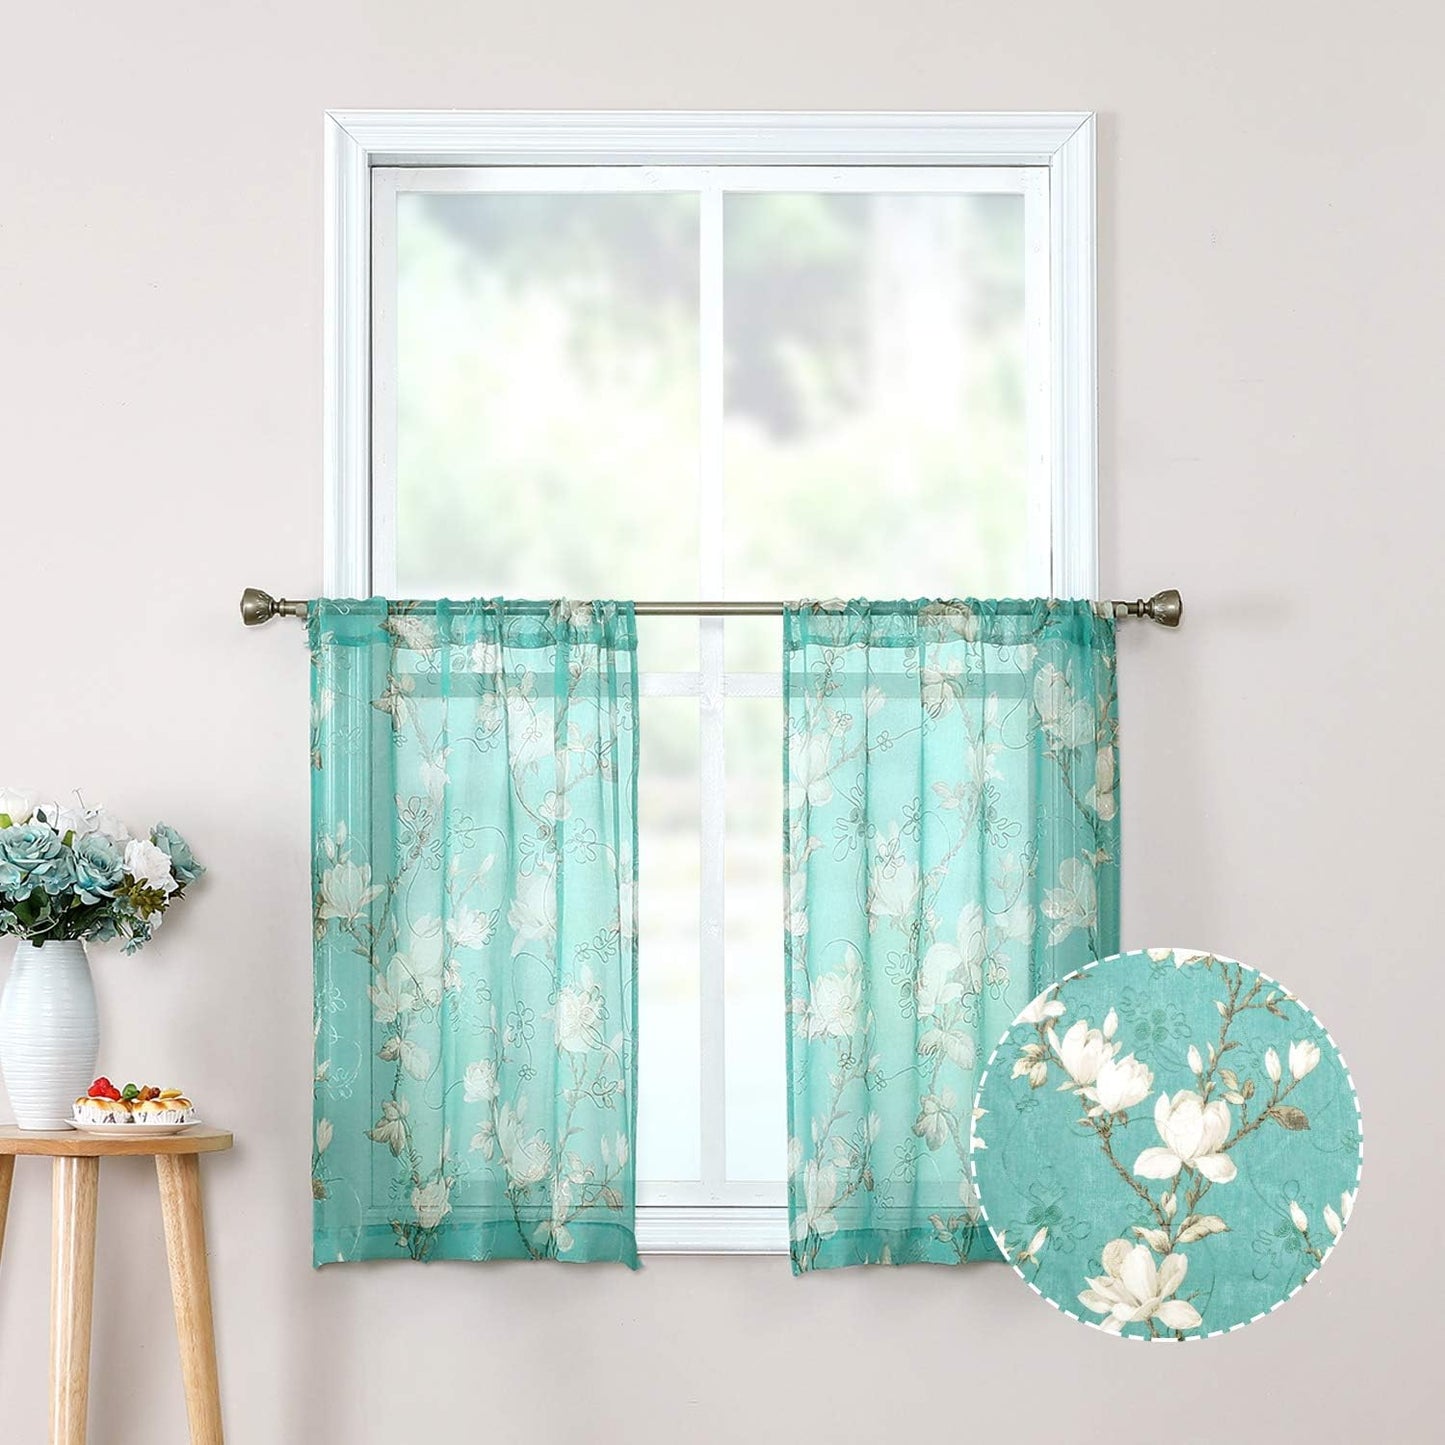 Tollpiz Floral White Sheer Curtain Flower Print Vine Embroidery Bedroom Curtains Rod Pocket Voile Window Curtain for Living Room, 54 X 84 Inches Long, Set of 2 Panels  Tollpiz Tex Turquoise 30"W X 24"L 